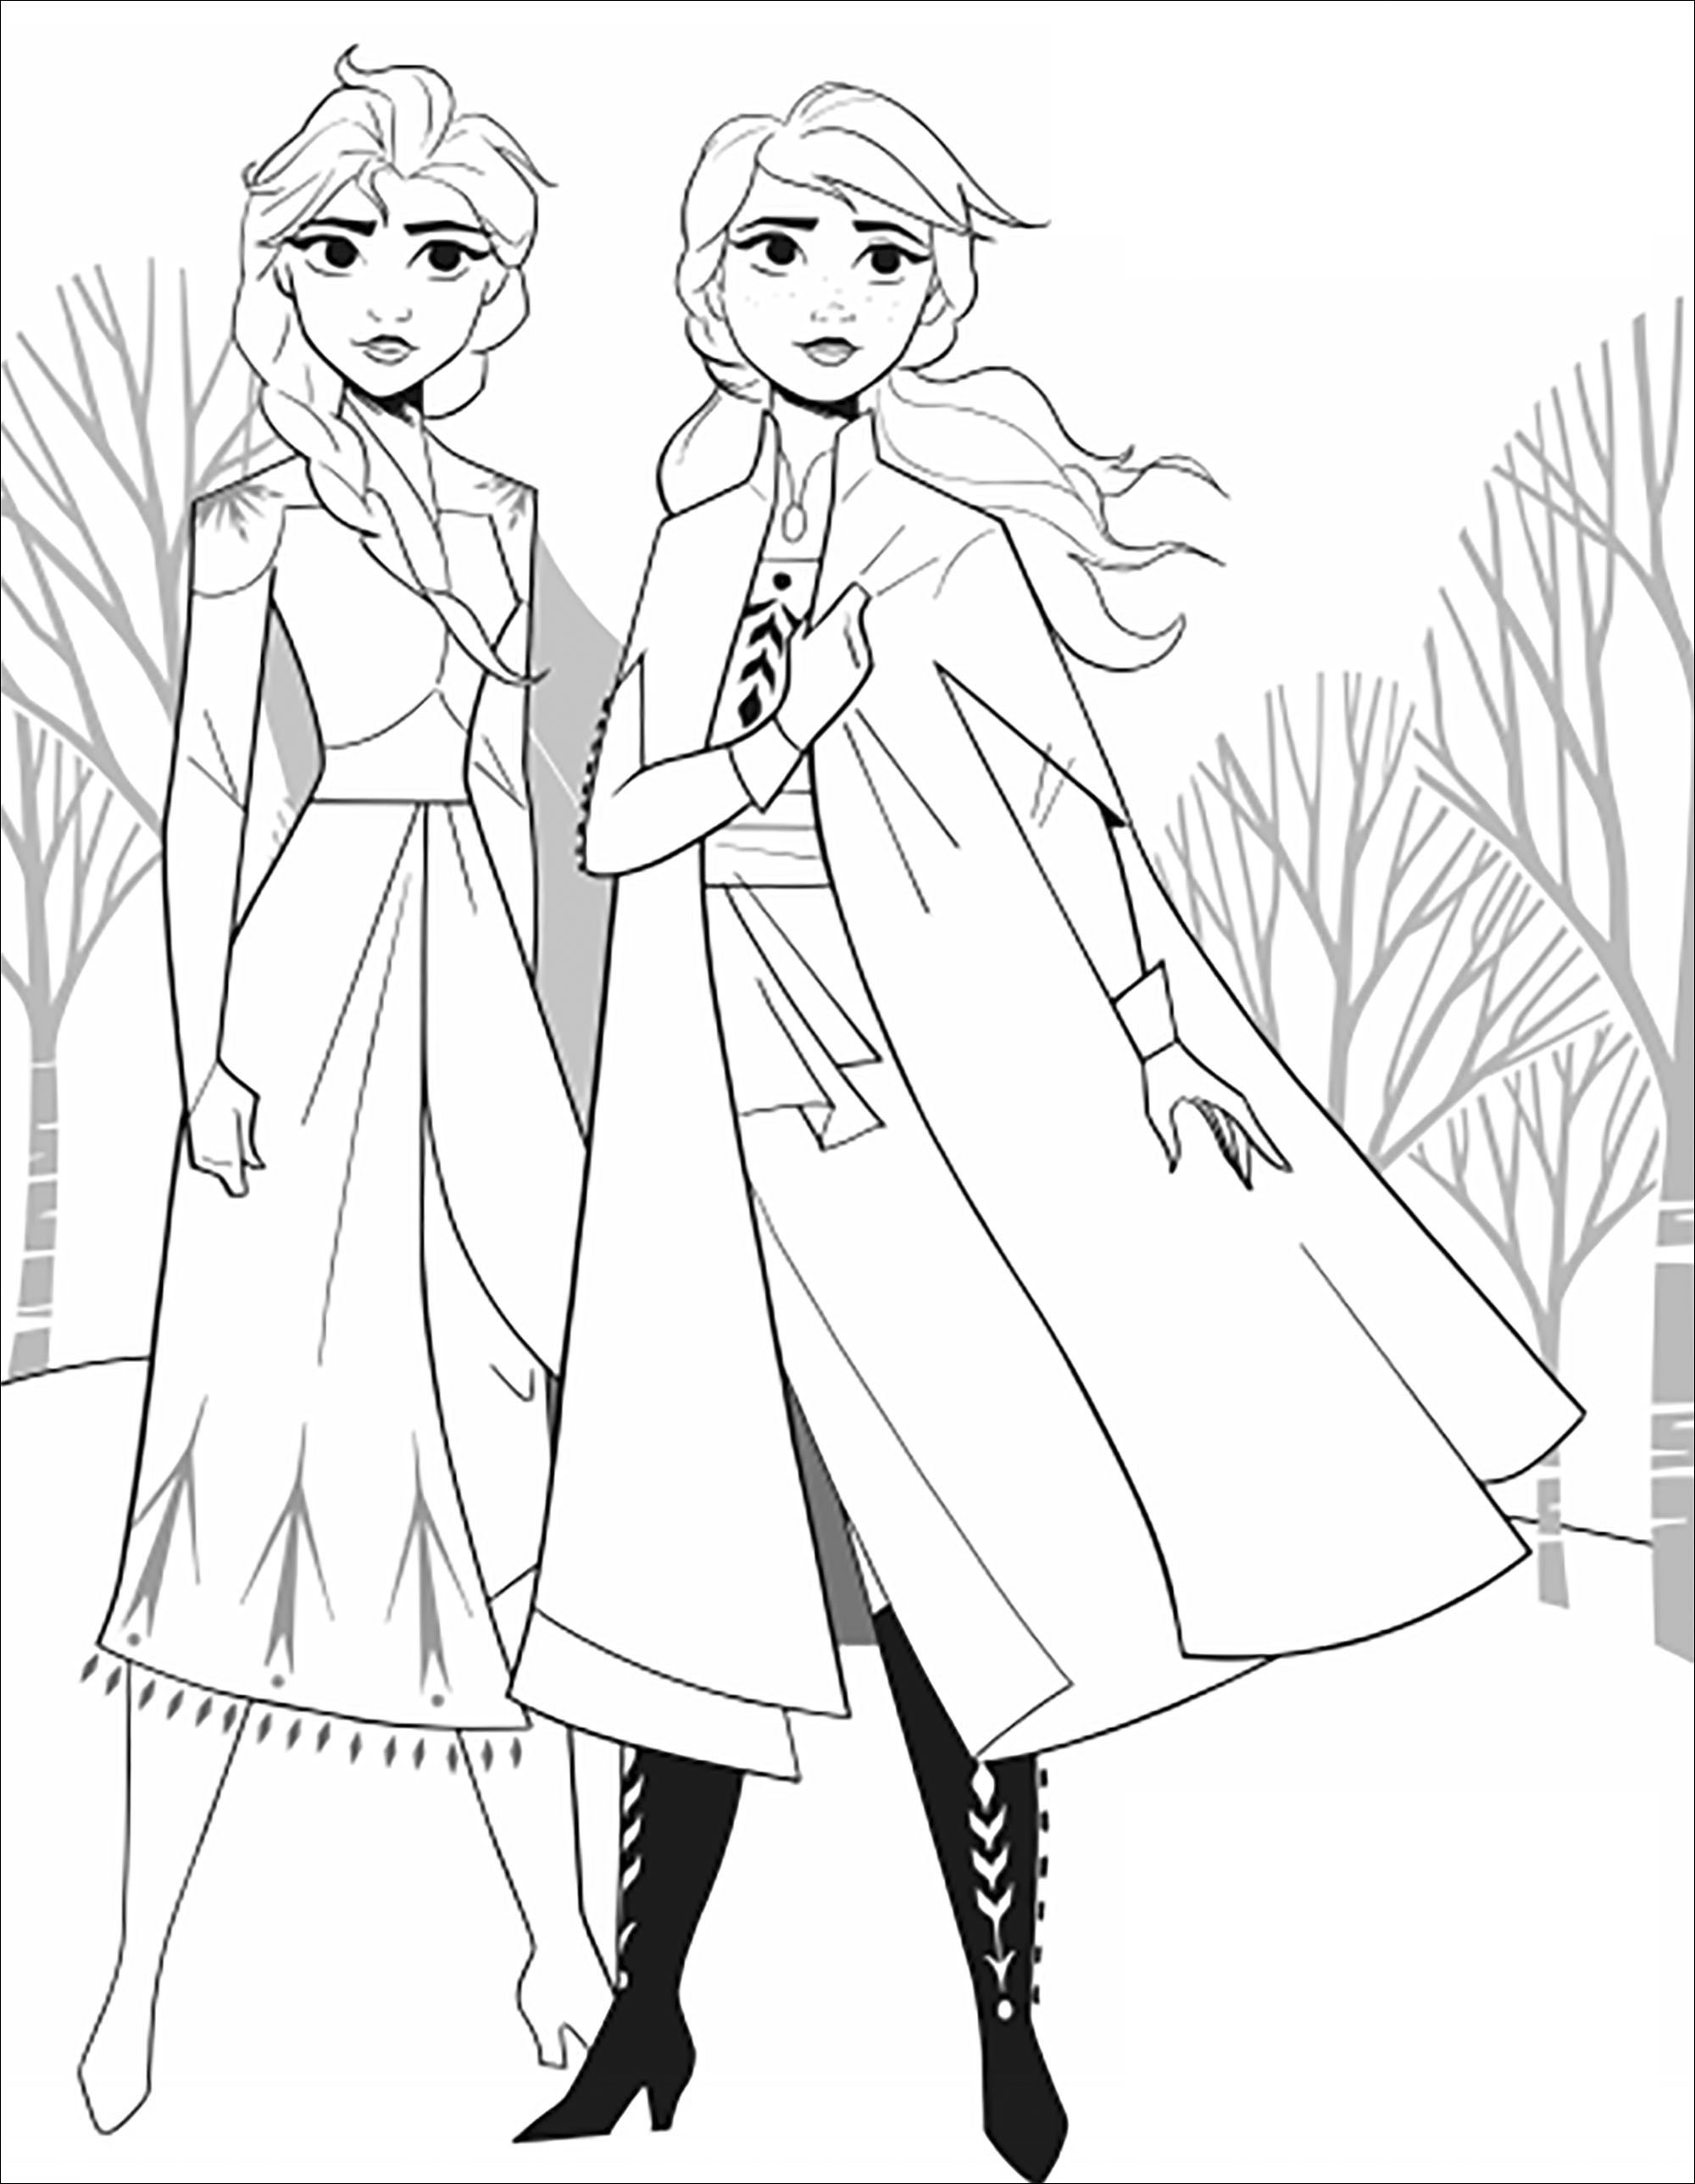 Anna Coloring Pages for Children